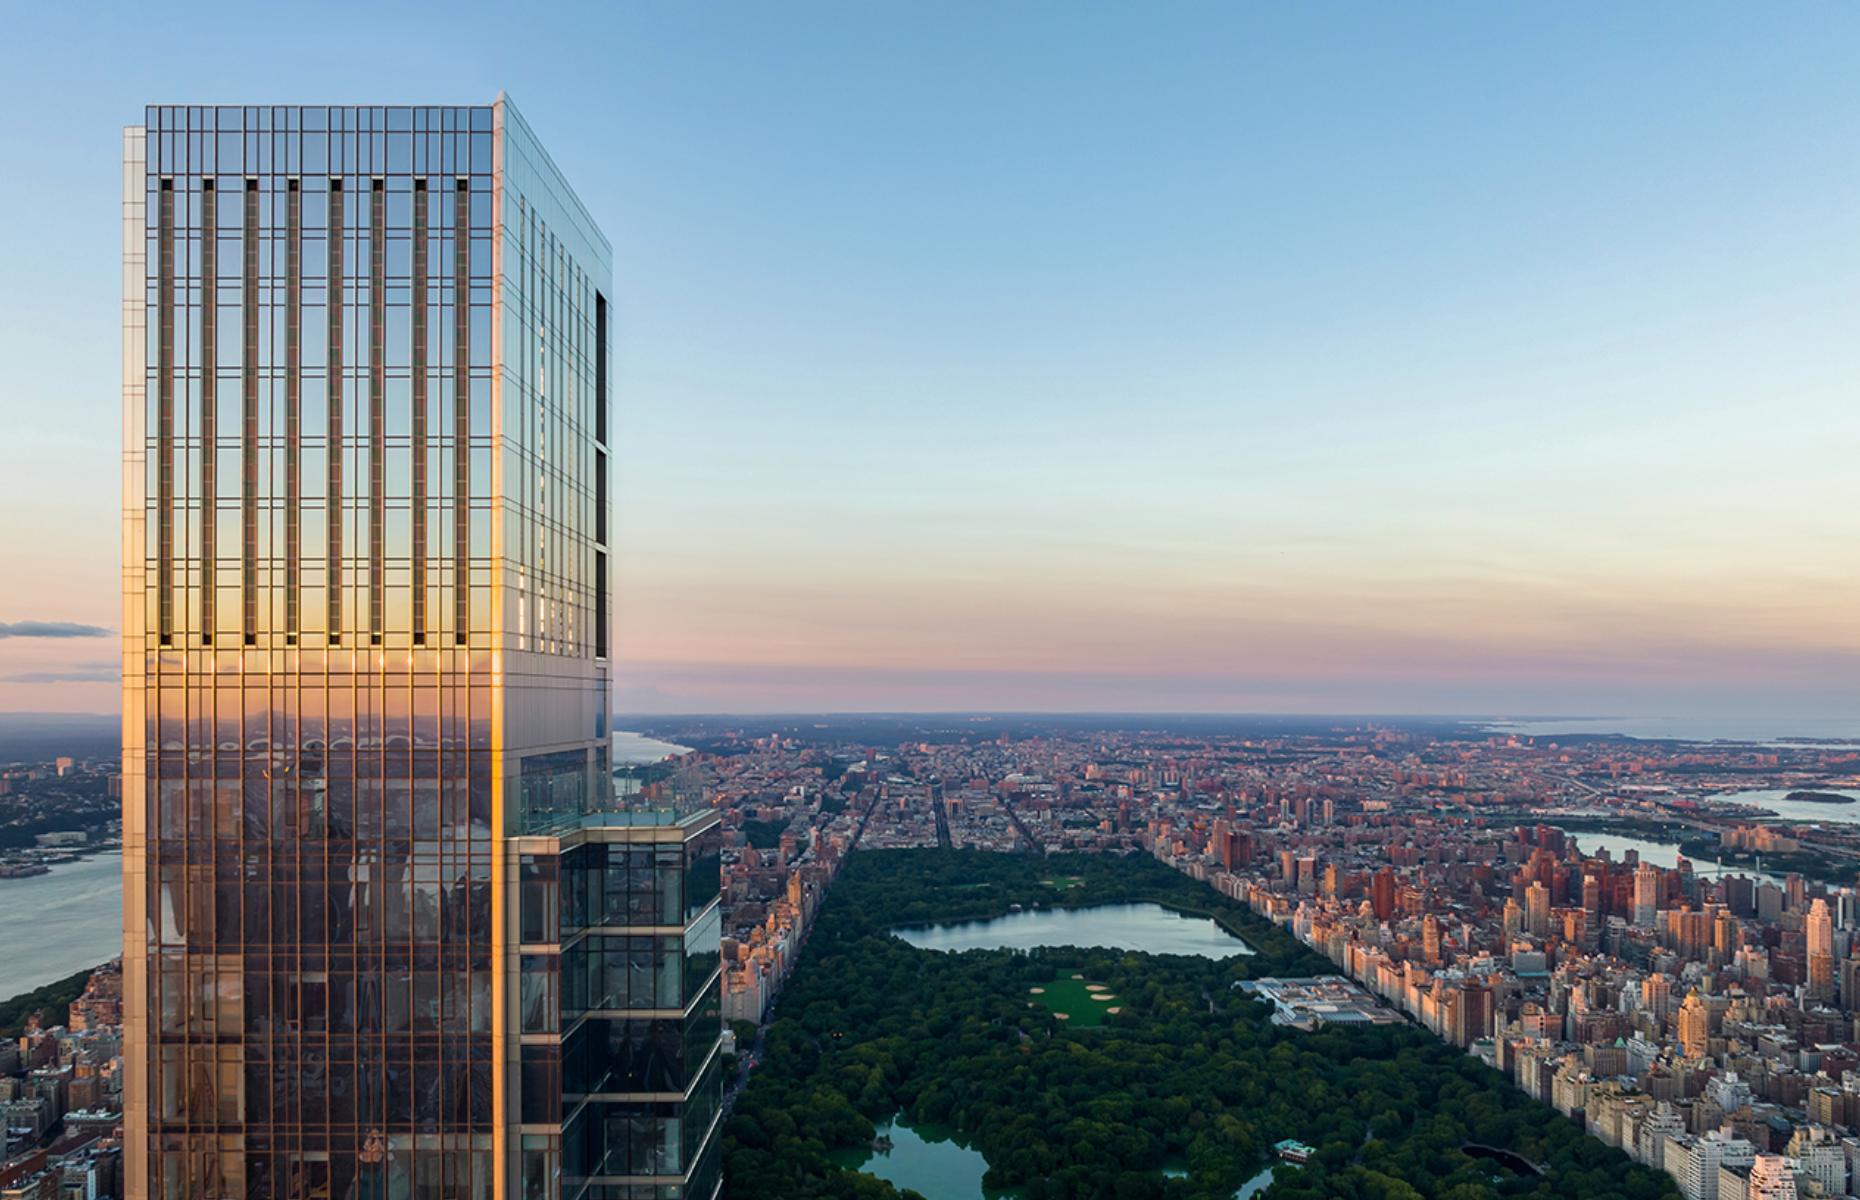 <p>Offering spectacular city panorama, unparalleled amenities, and gorgeous interior design that is only outdone by the view, New York's incredible Central Park Tower penthouse is unlike any you might have seen before. The crème de la crème of apartment living, the space has been aptly named the '<a href="https://www.sothebysrealty.com/eng/sales/detail/180-l-85361-3947296/217-w-57th-street-house-manhattan-new-york-ny-10019">One Above All Else</a>' and we can certainly understand why. Let's step inside... </p>